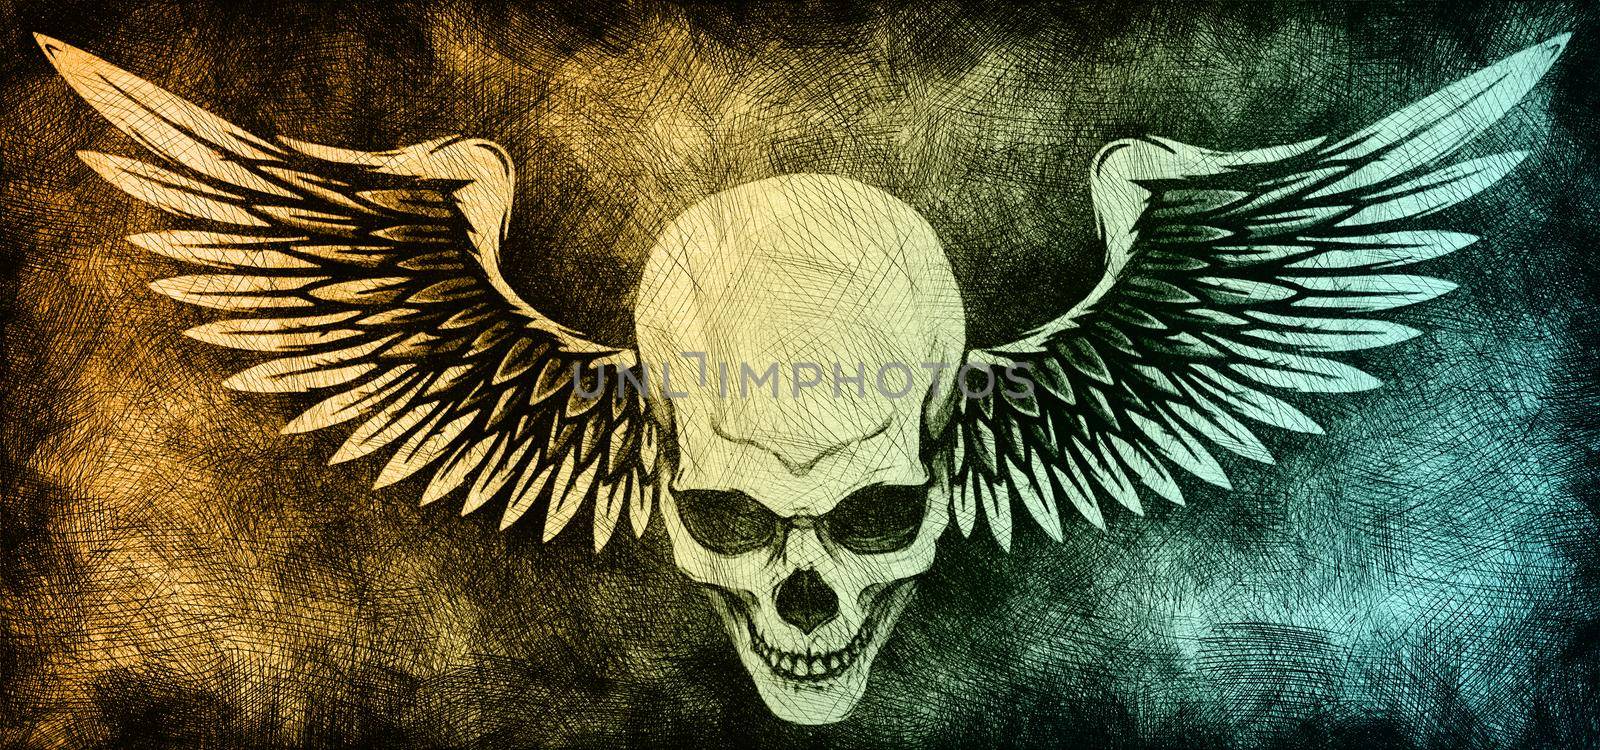 Grim reaper skull with wings drawing design by dean